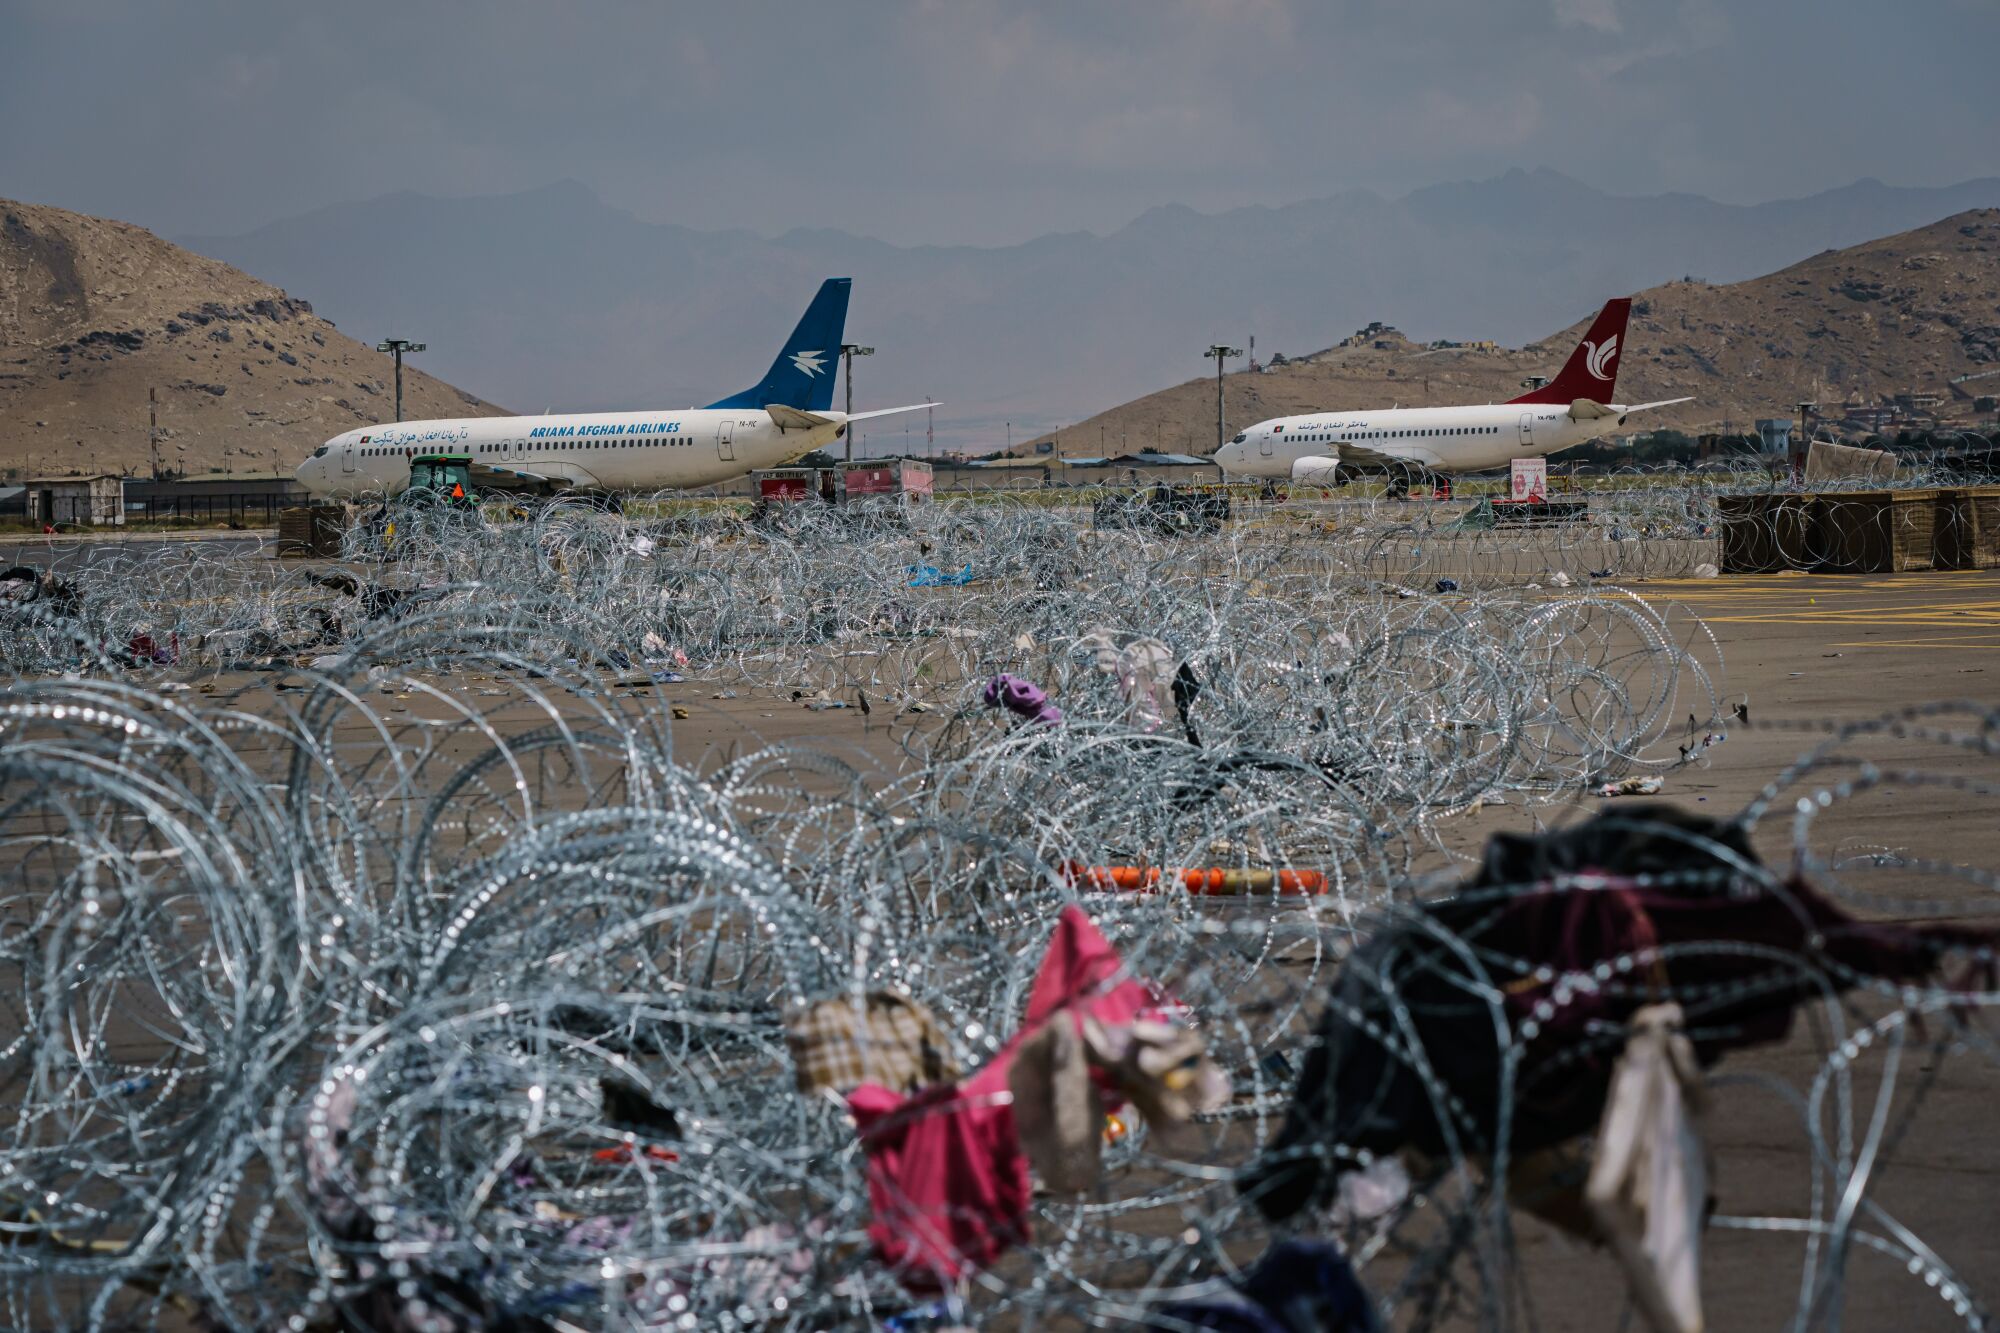 Barbed wire lies across the tarmac